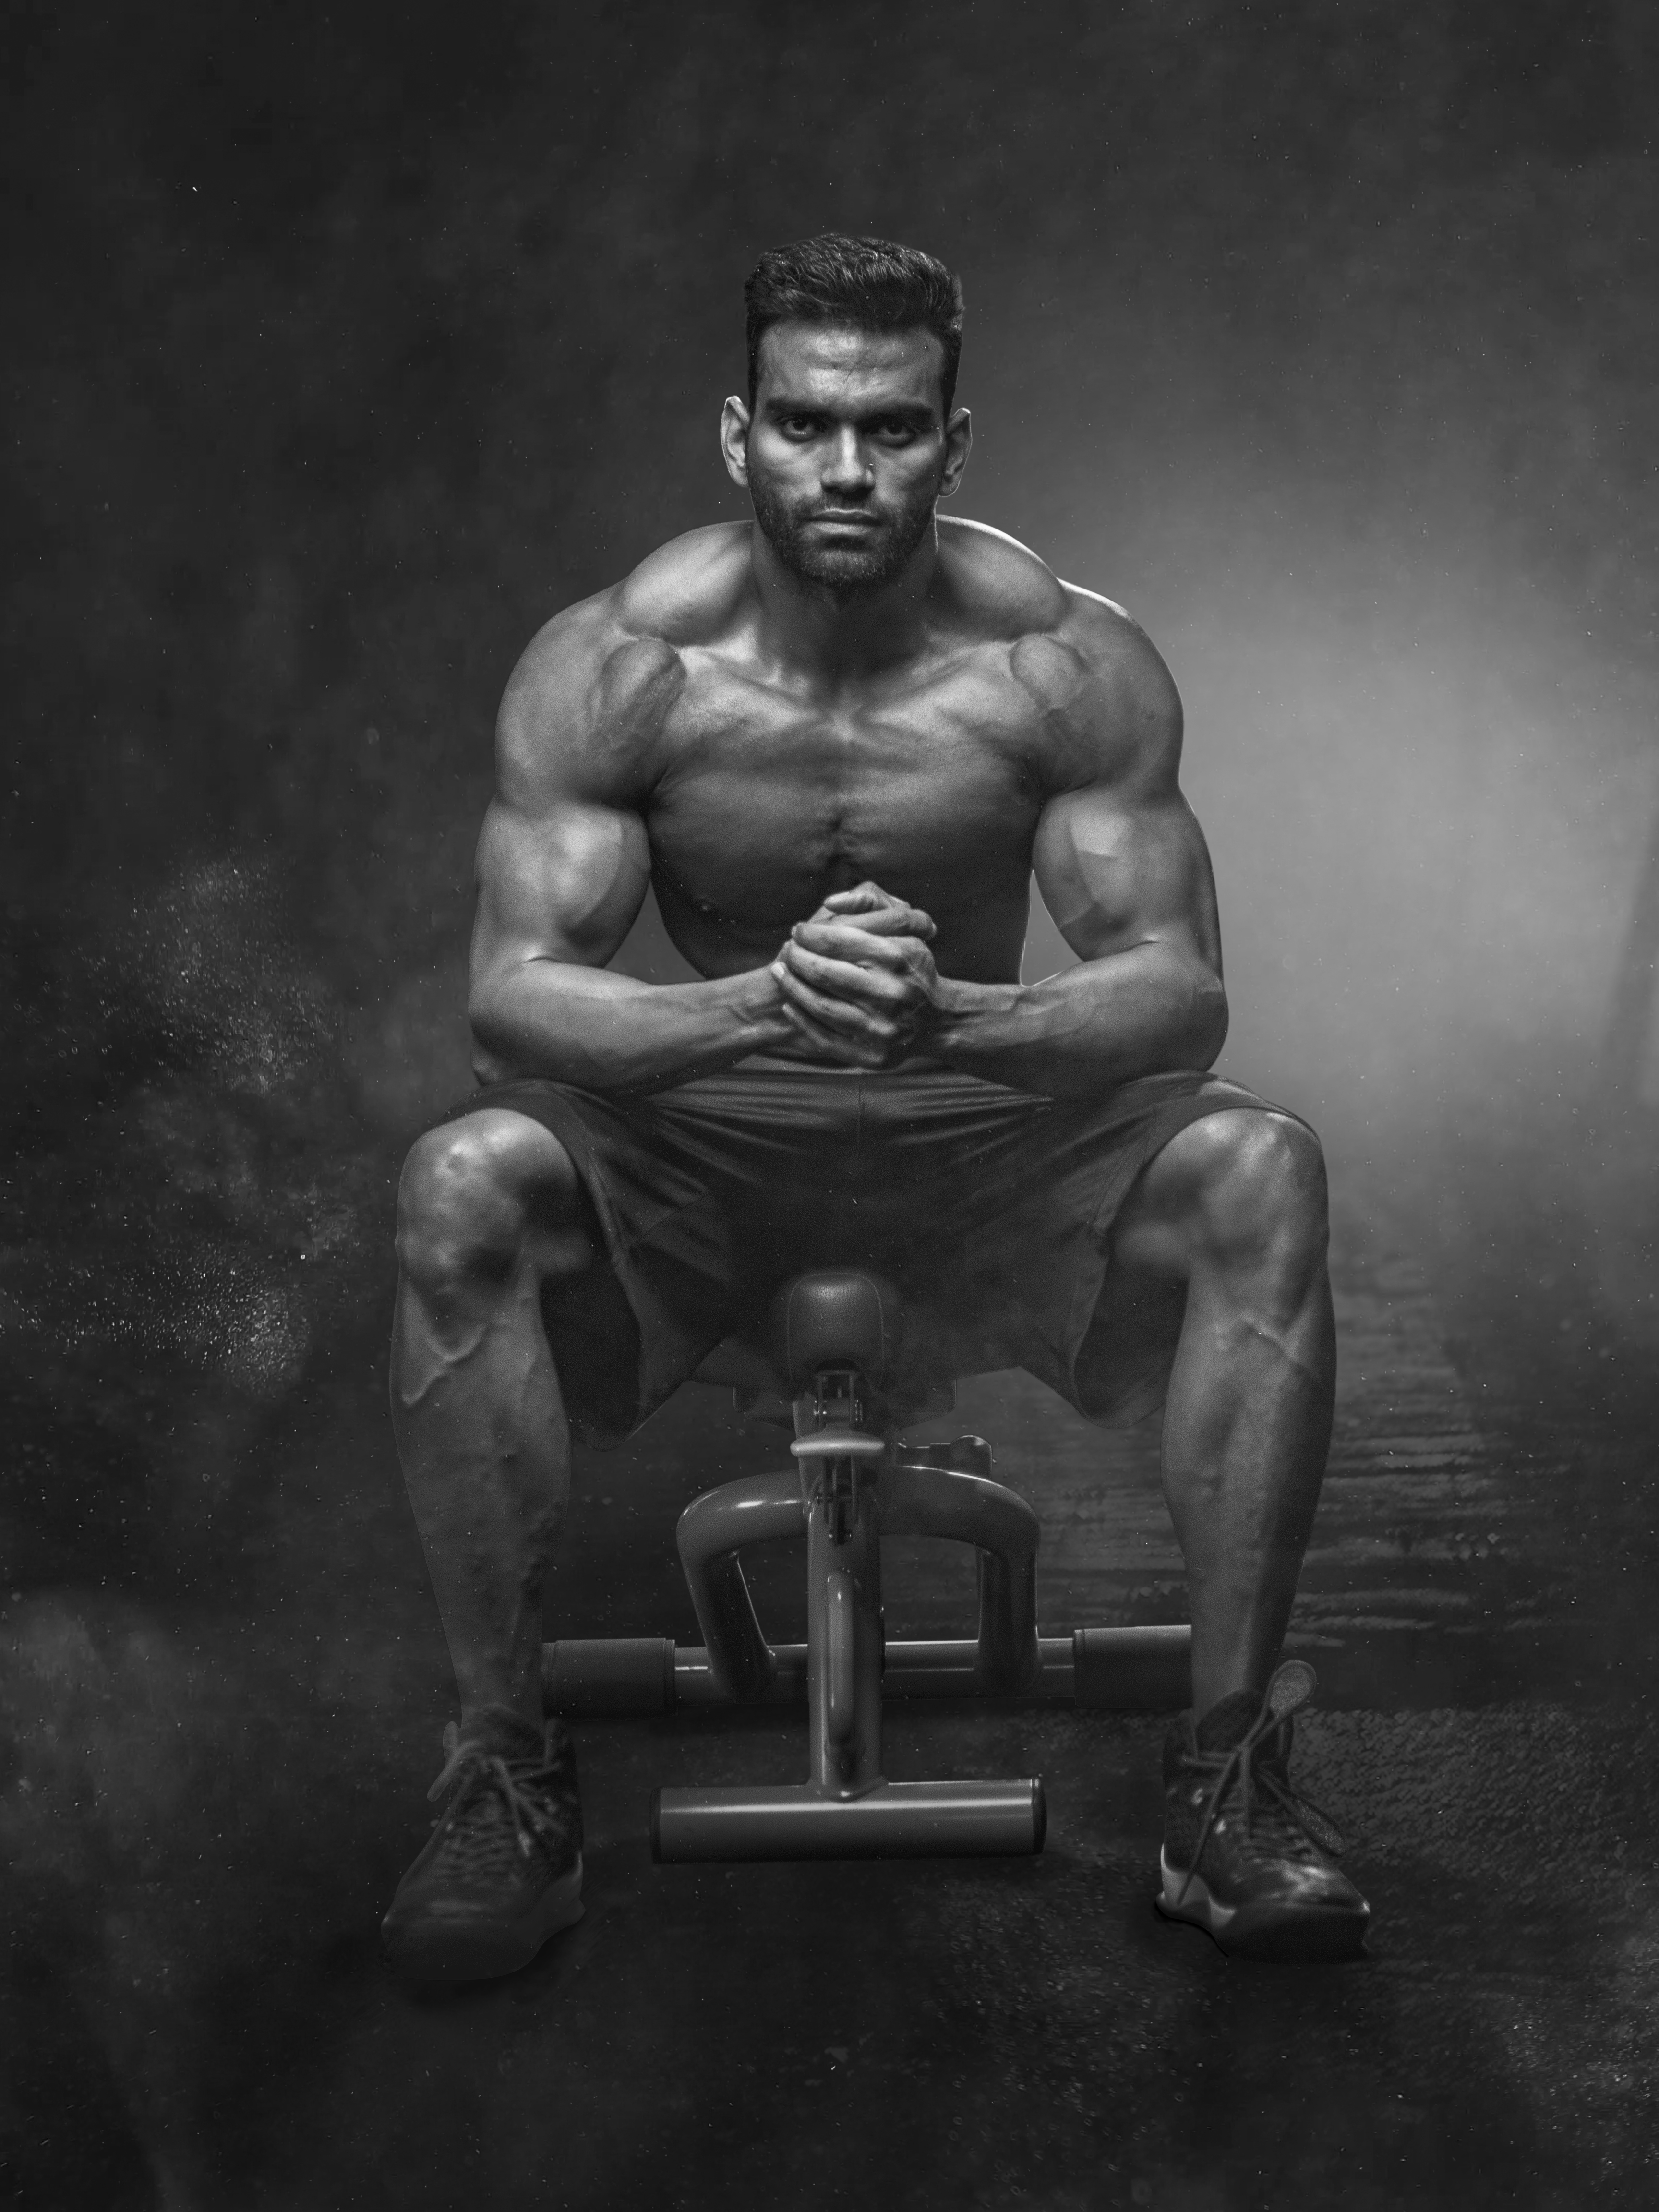 Bodybuilding photos download the best free bodybuilding stock photos hd images